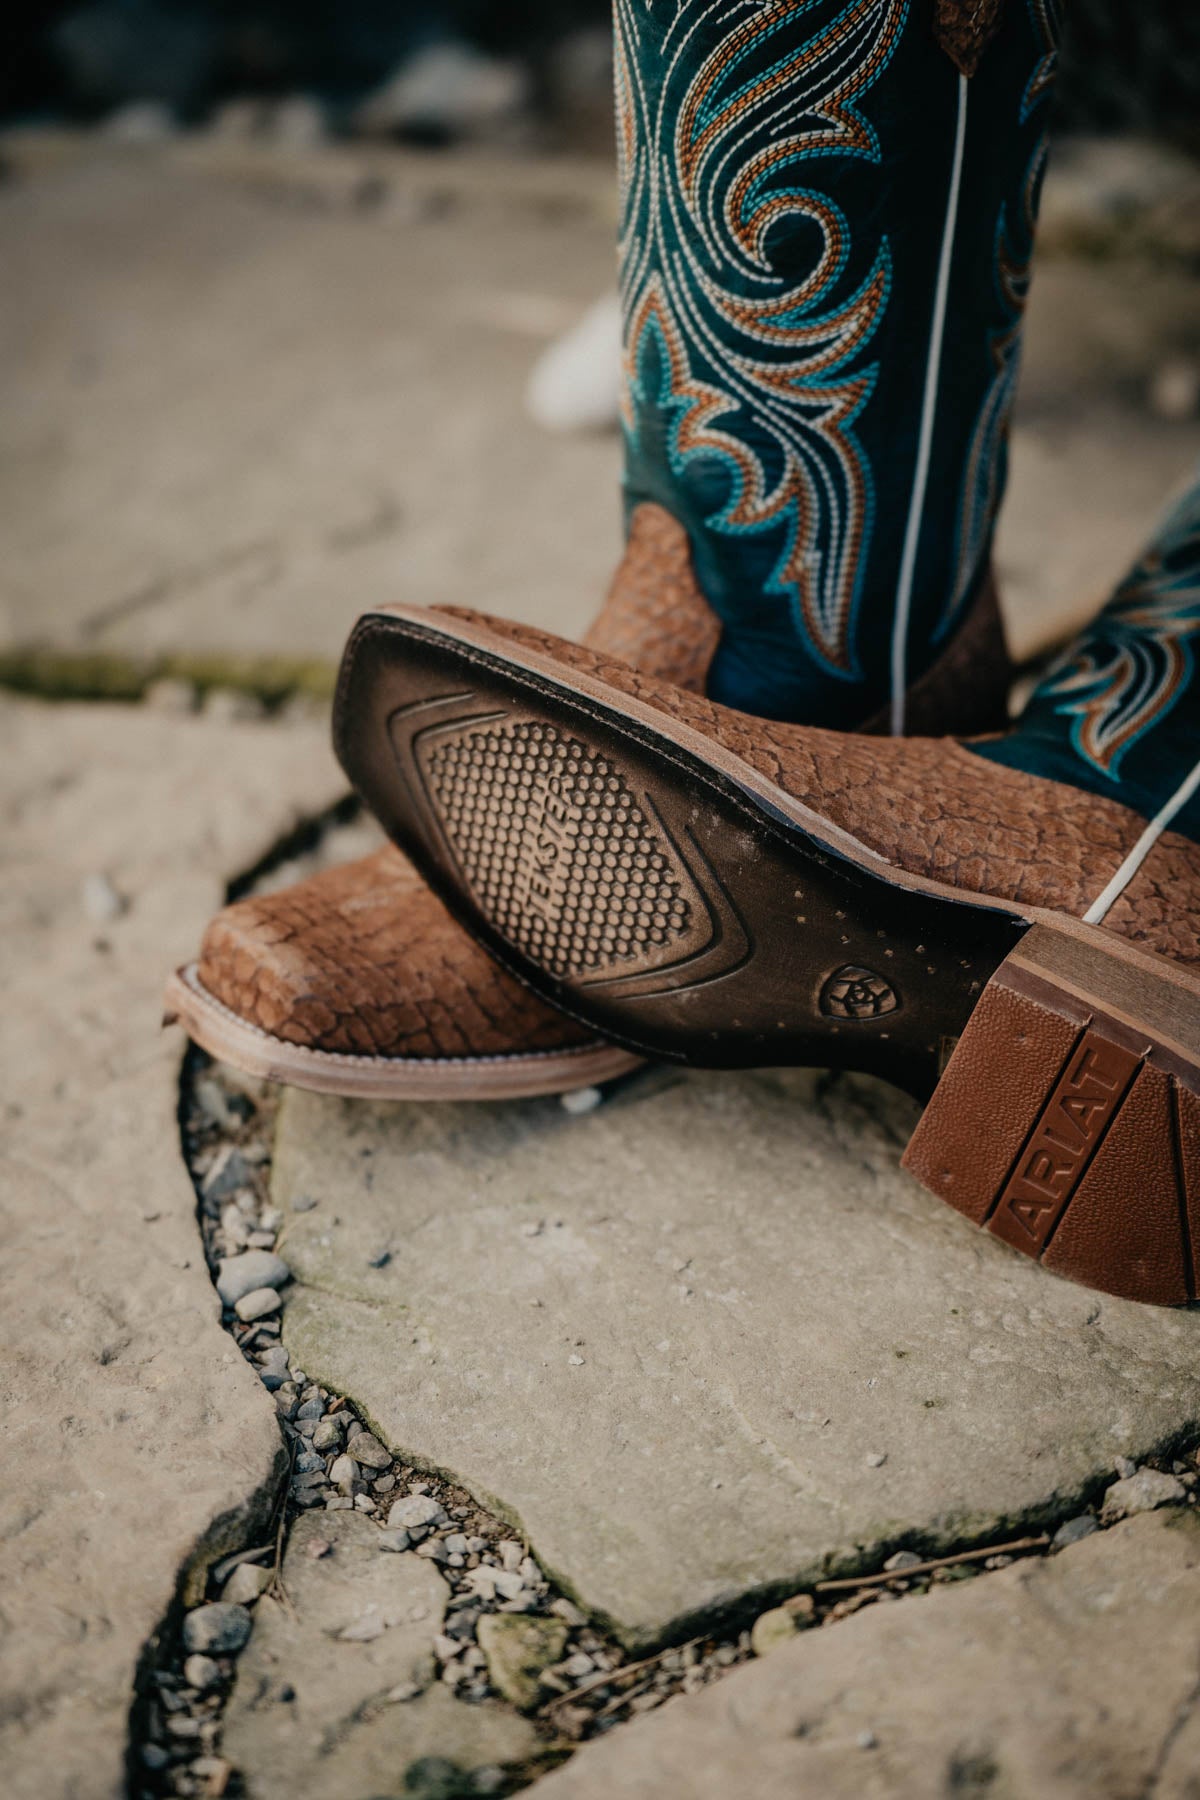 Futurity Starlight Western Boot by Ariat (Tan and Teal)